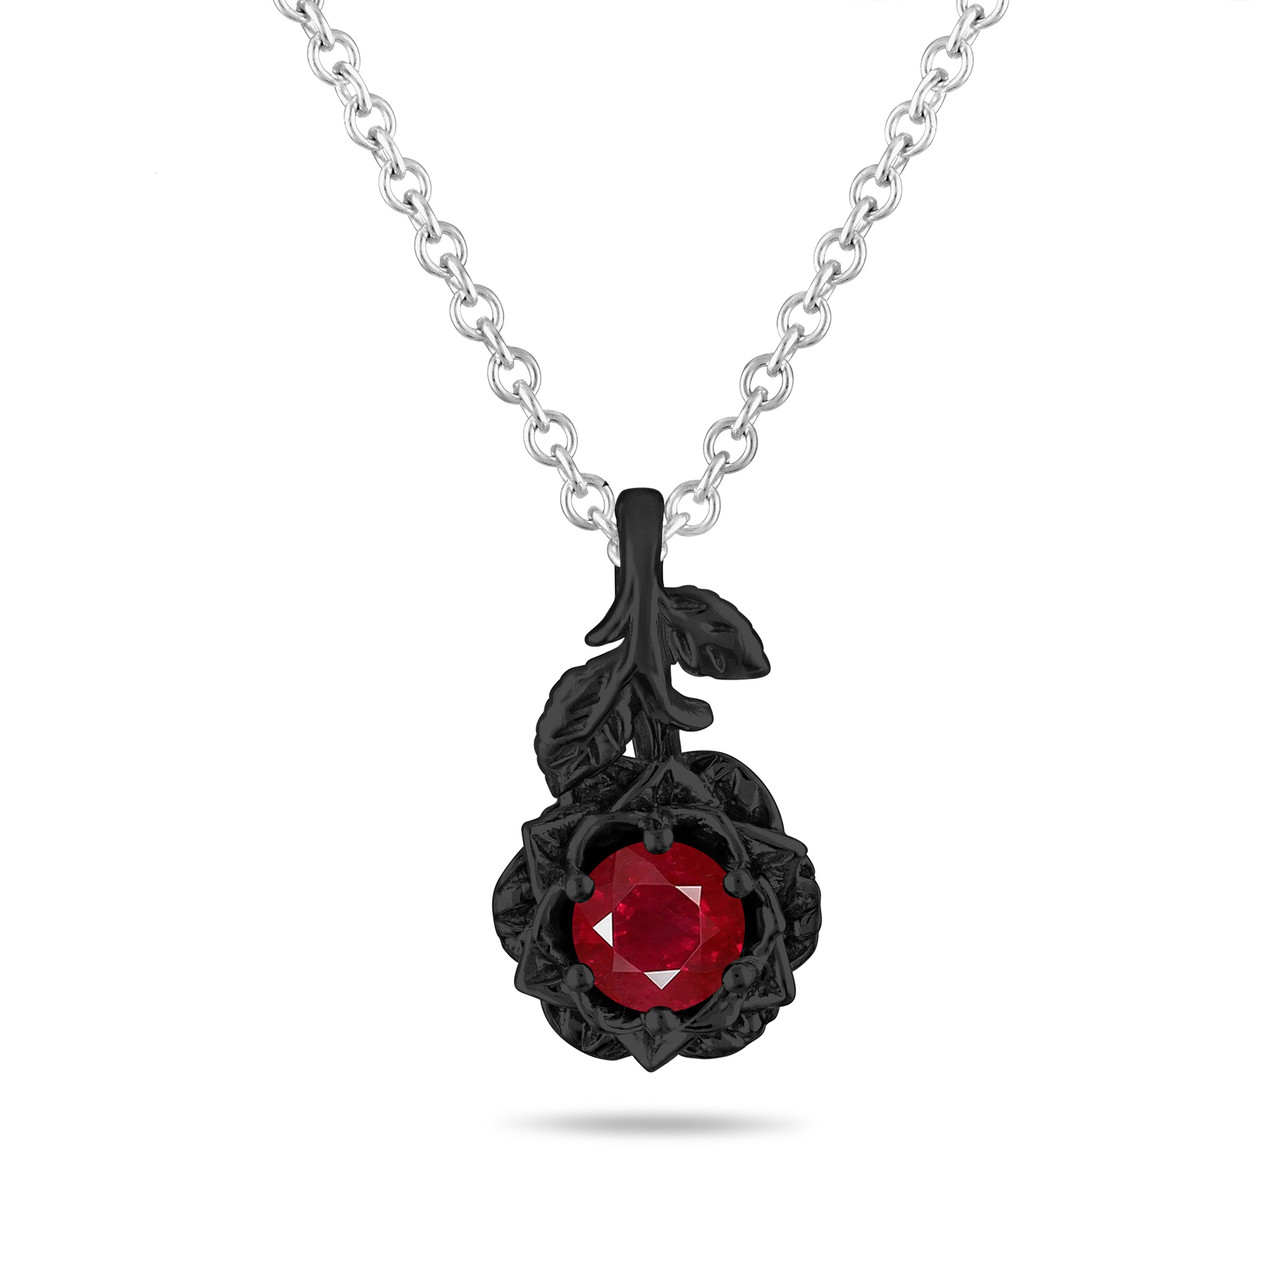 Yin Yang Necklace Black And Red Circle Pendant Stainless Steel or 18k Gold  18-22